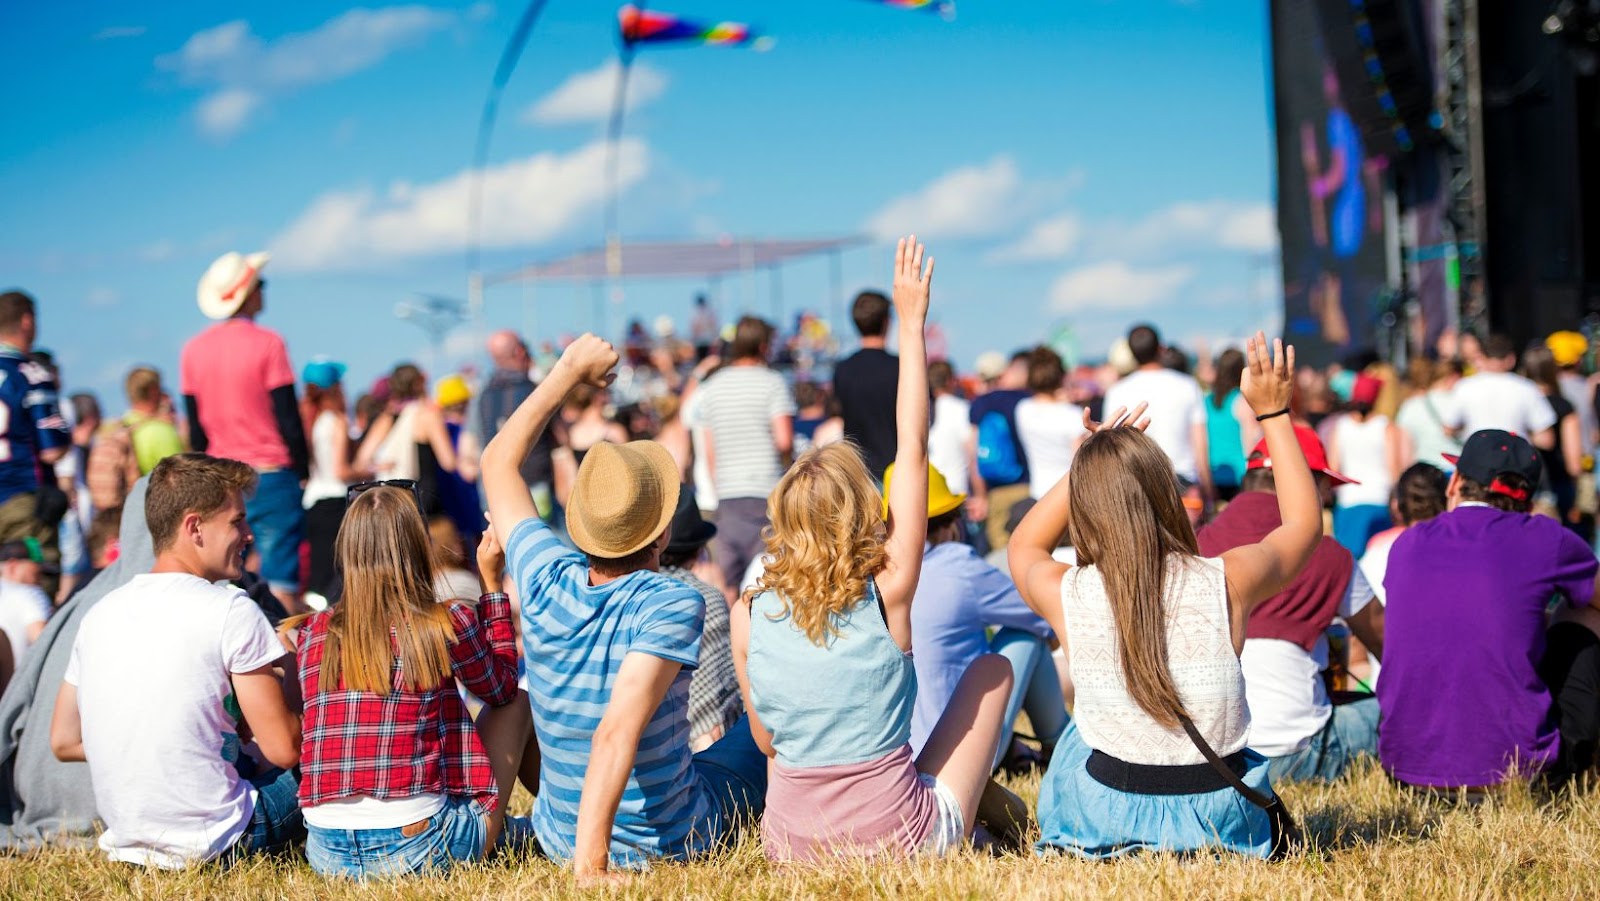 9 Things To Prepare Before Going To A Music Festival